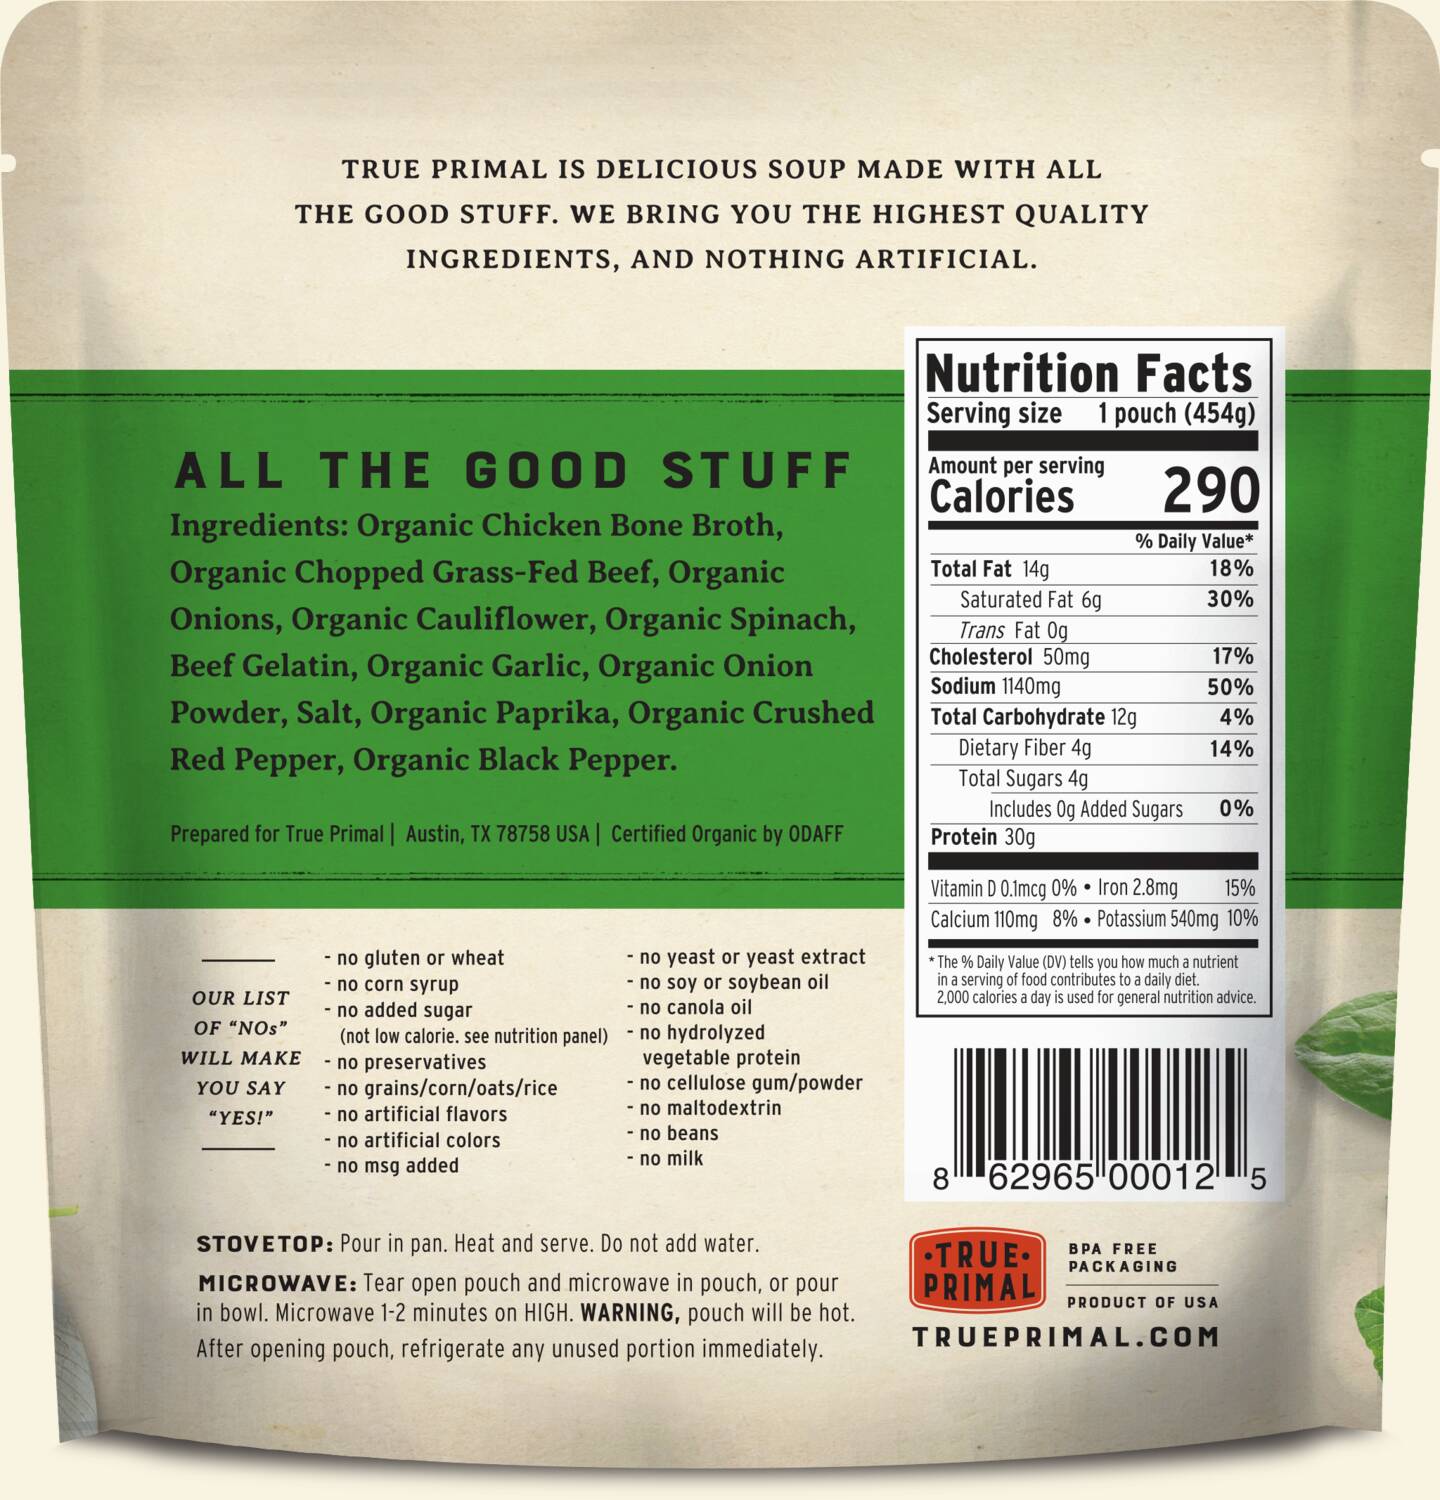 True Primal Savory Wedding Organic Soup in pouch, back of label. UPC: 862965000125.